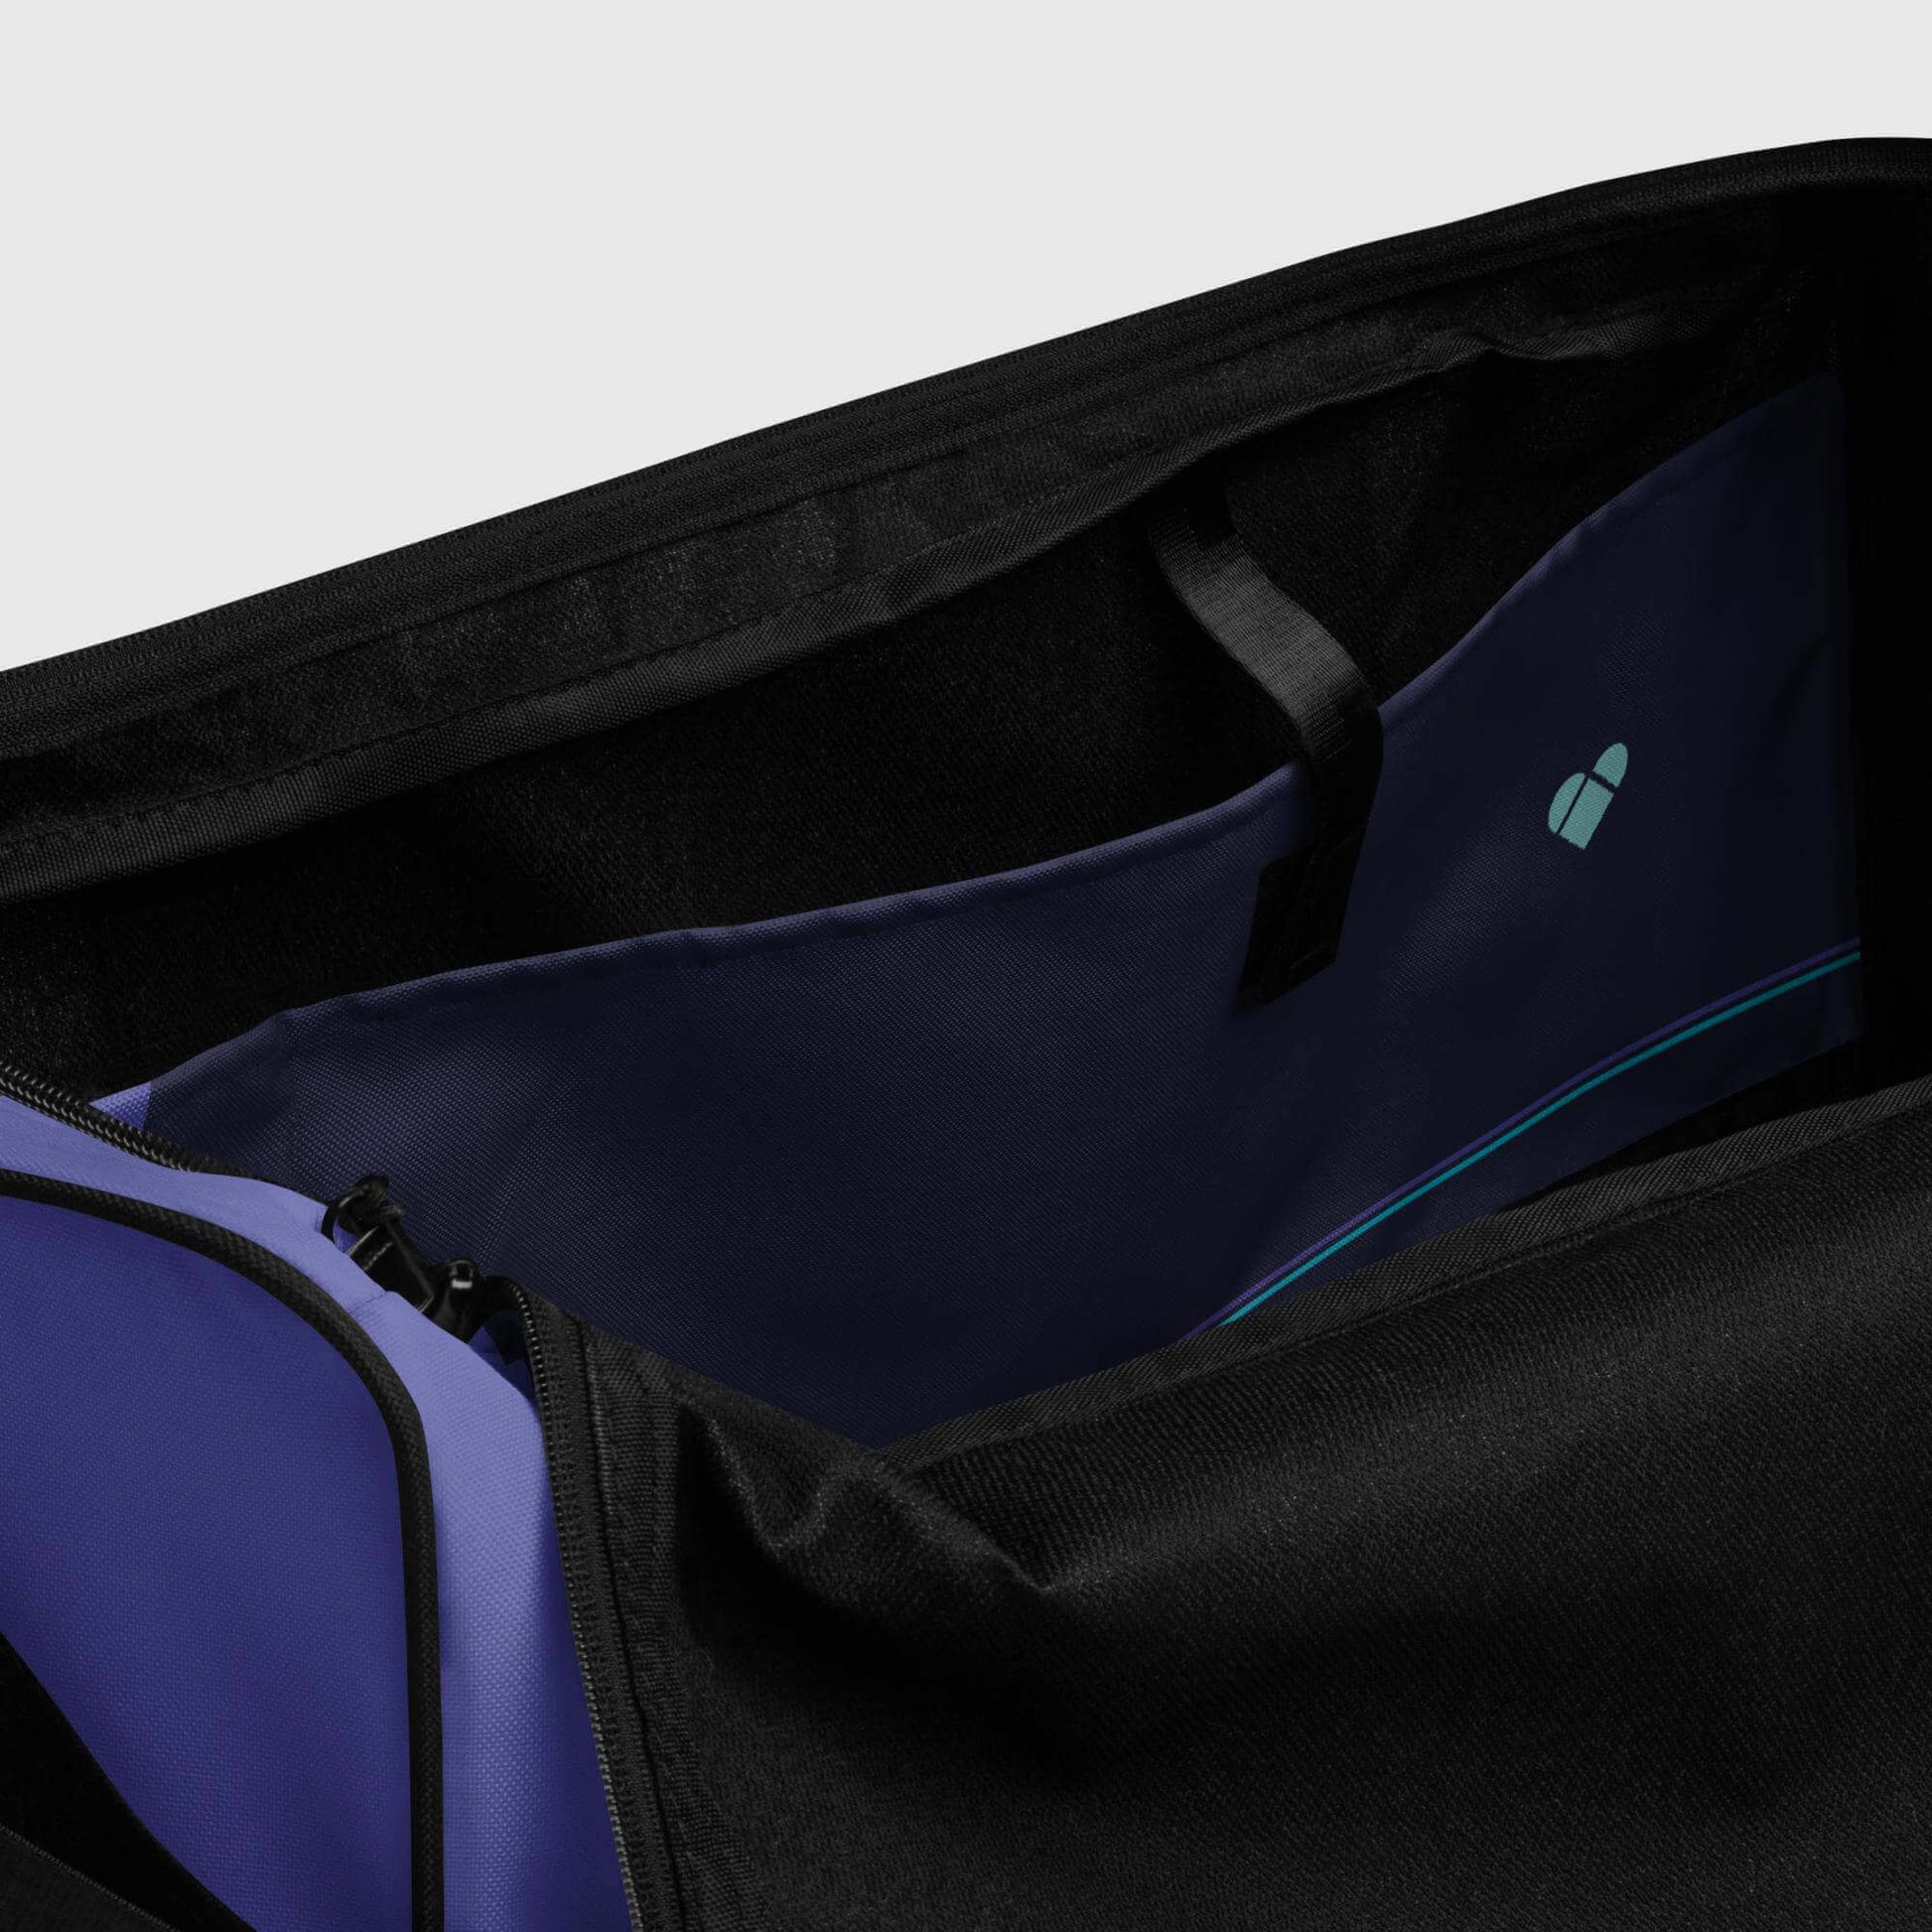 inside details - Mint & Periwinkle Gym and Sports Bag